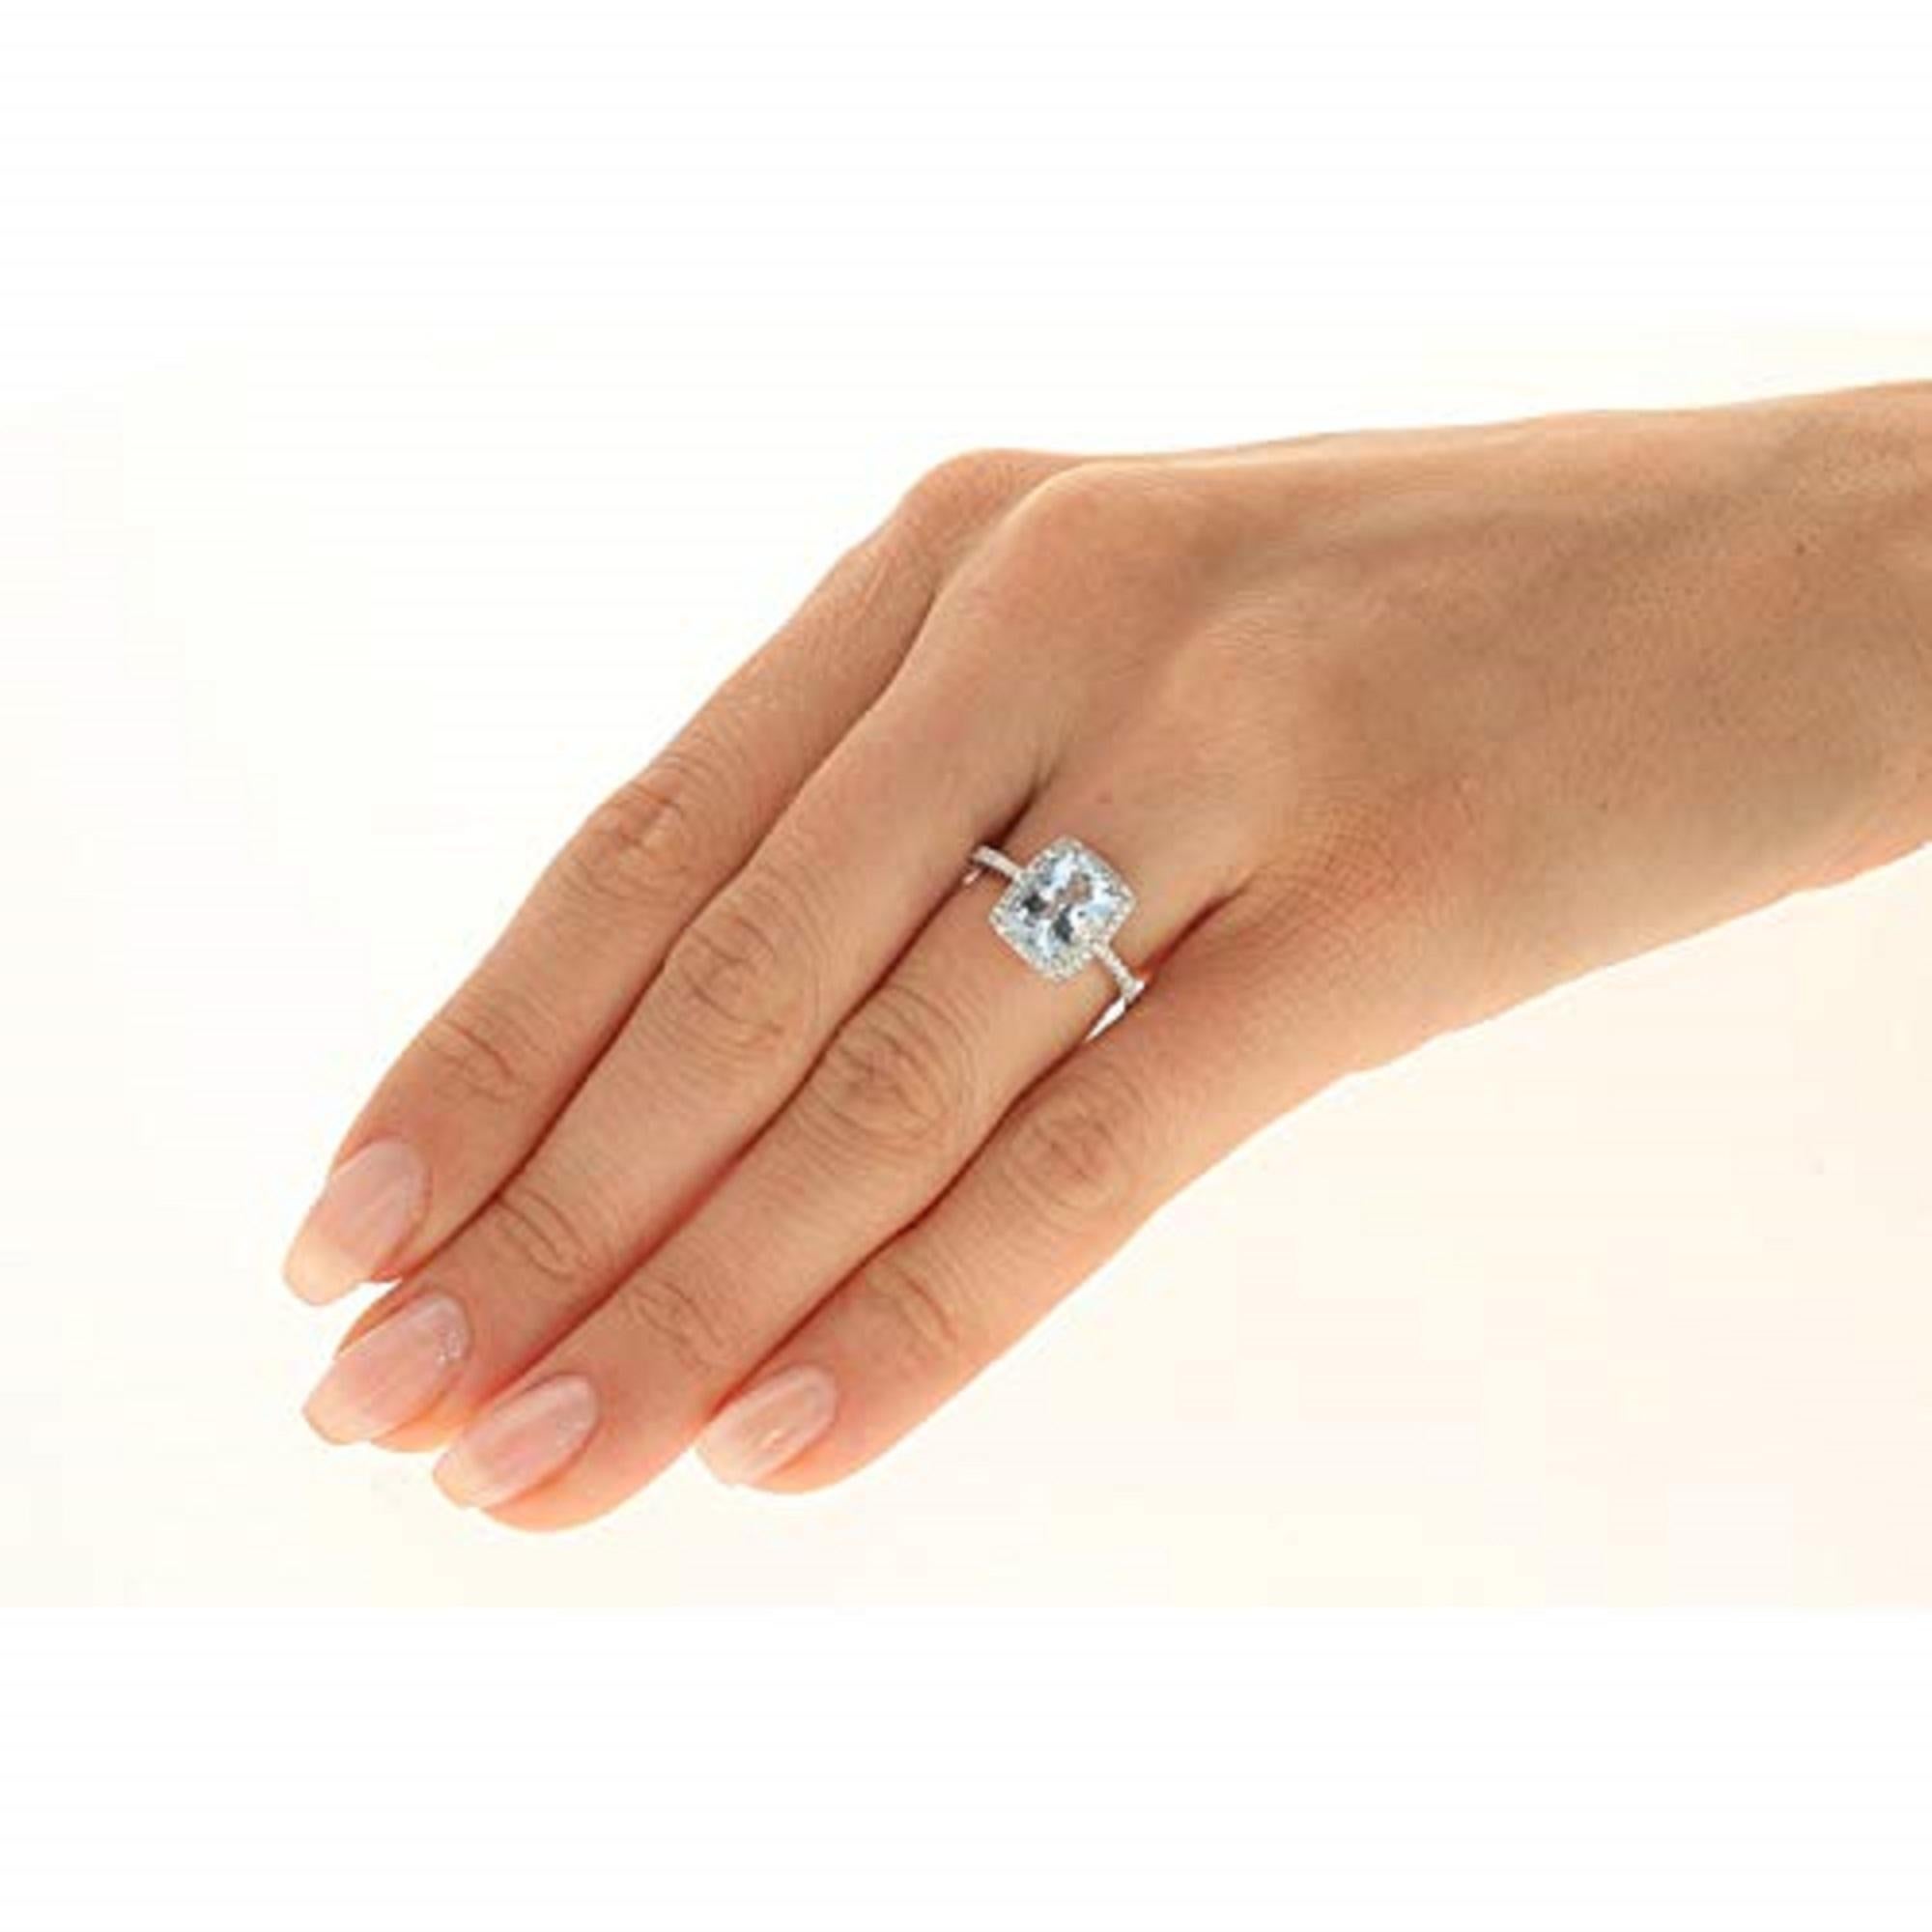 Stunning and delicate, this elegant ring is crafted from sumptuous 14k white gold and features a marvelous cushion cut Gin & Grace Genuine aquamarine. The aquamarine is prong set in the center of the rectangular ring. A rectangular halo of sparkling